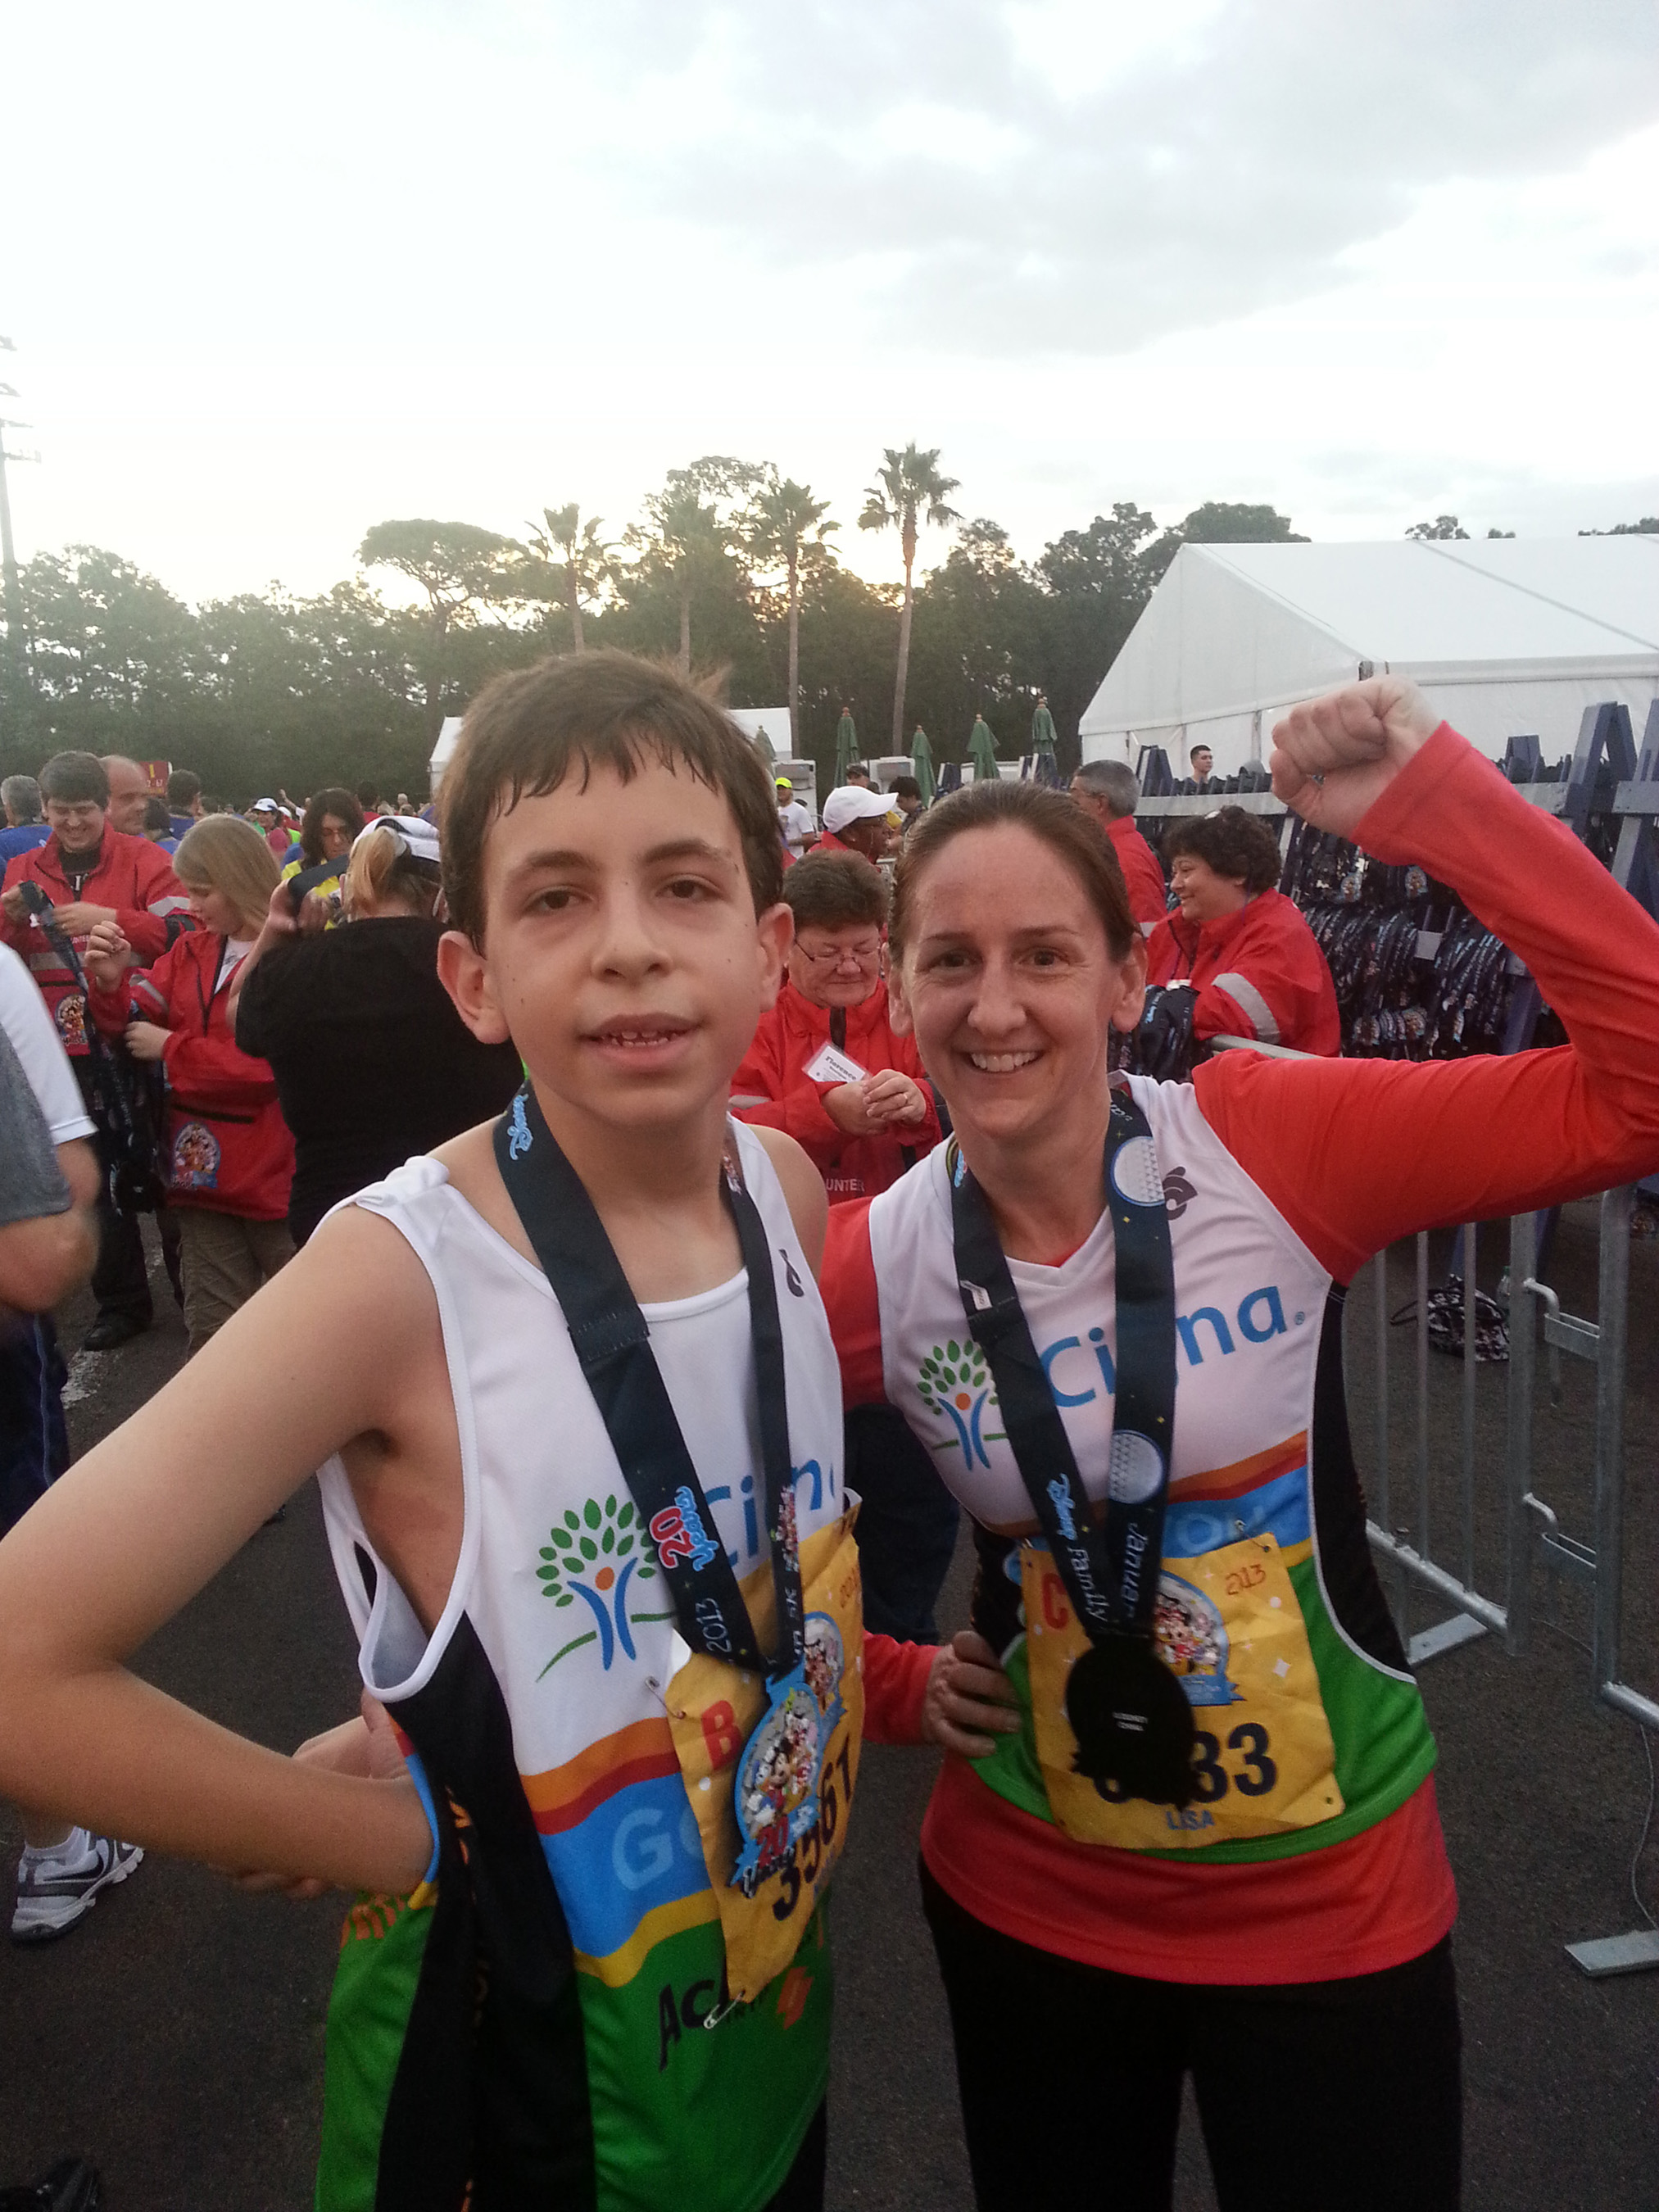 Noah, an Achilles Kids athlete sponsored by Cigna, at finish line with his running partner, Lisa.